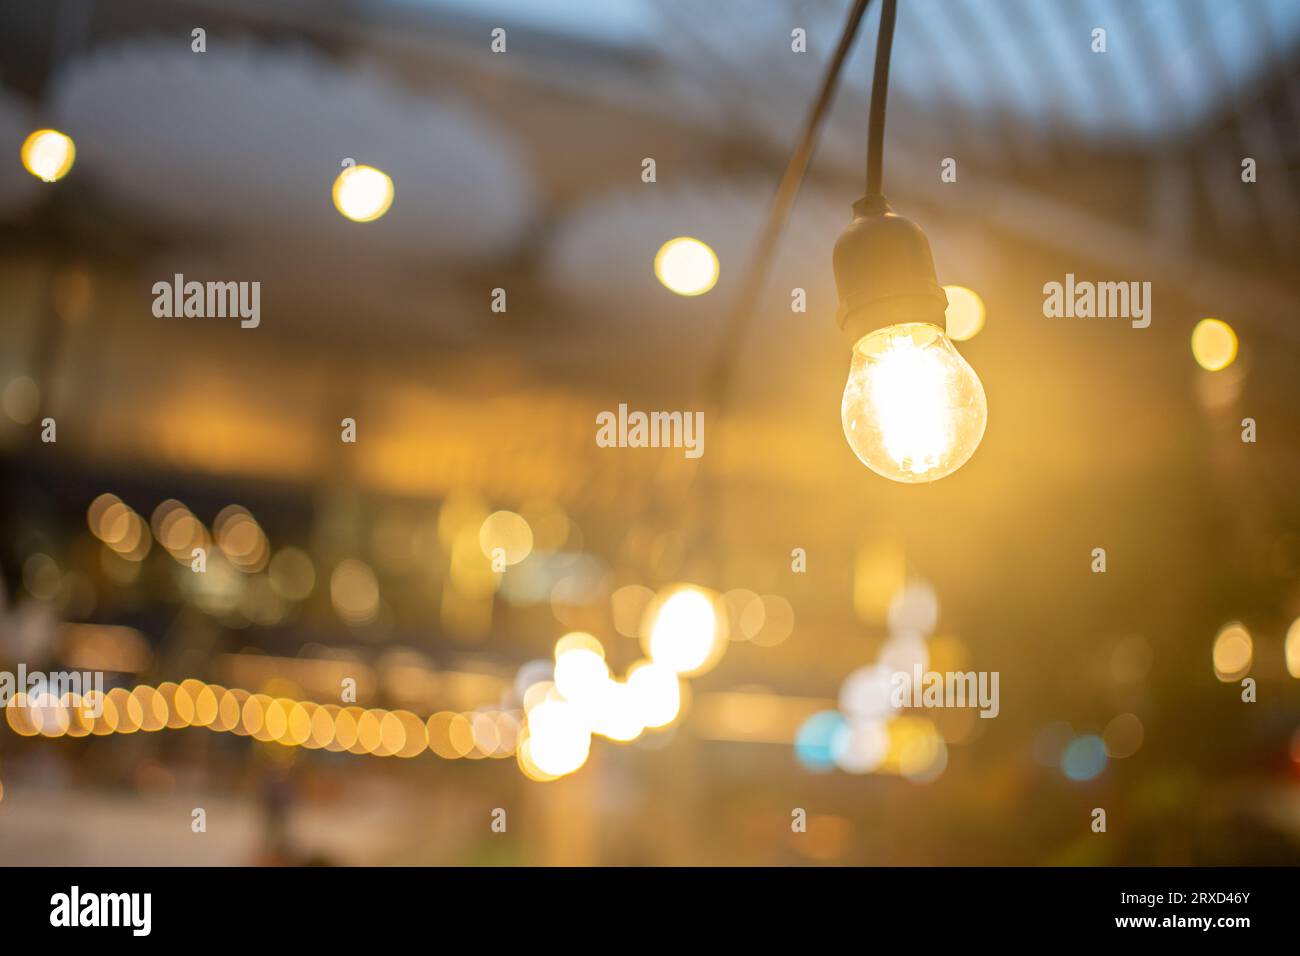 https://c8.alamy.com/comp/2RXD46Y/decorative-outdoor-light-bulbs-hanging-in-air-cozy-warm-yellow-light-bulbs-lined-up-in-row-background-is-blurred-luminous-incandescent-lamps-hanging-in-form-go-garland-in-yard-2RXD46Y.jpg